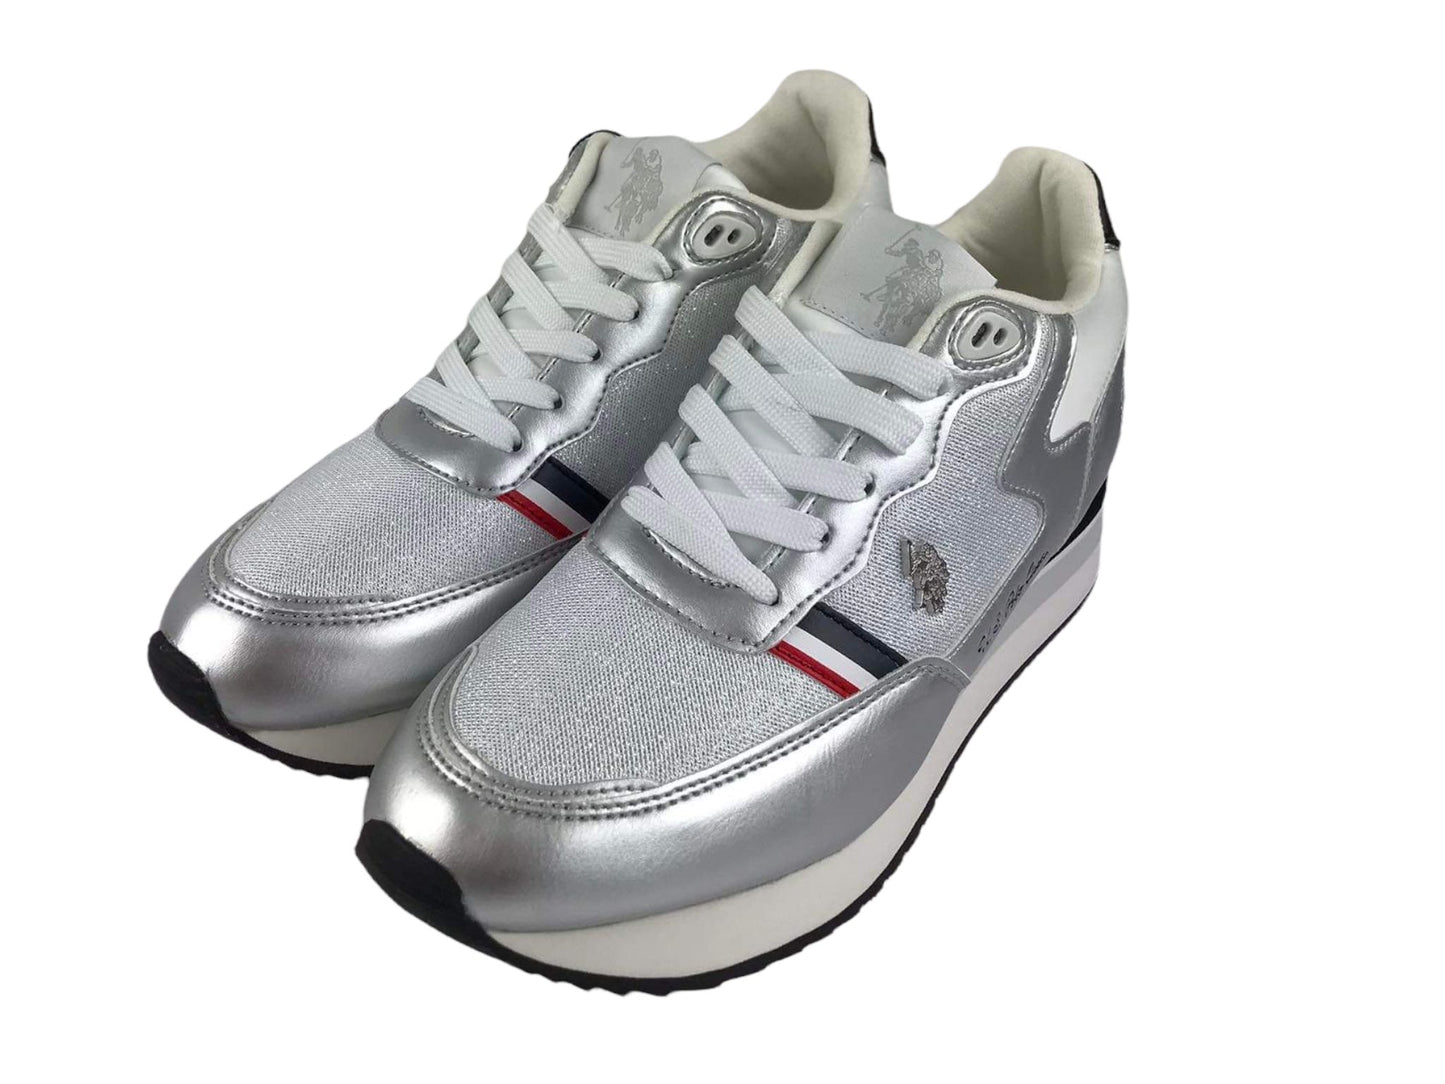 US Polo Assn. | Women's sneakers with silver gray and navy eco-leather SYL laces